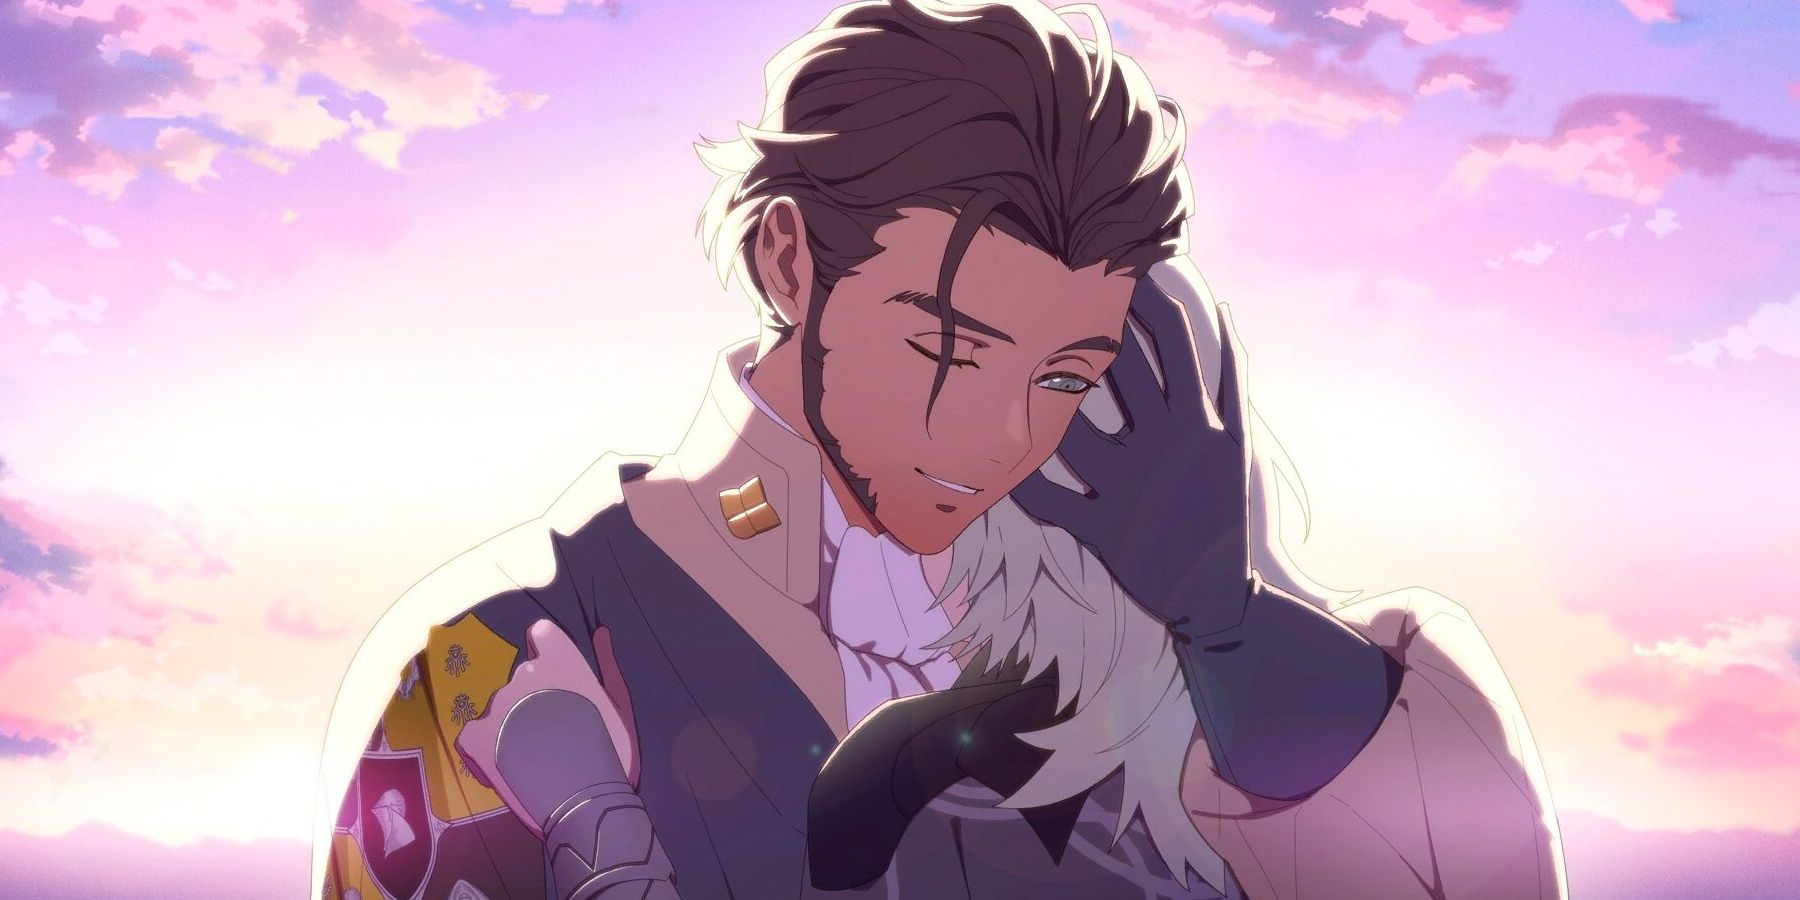 Claude hugging female Byleth in S suppot scene.